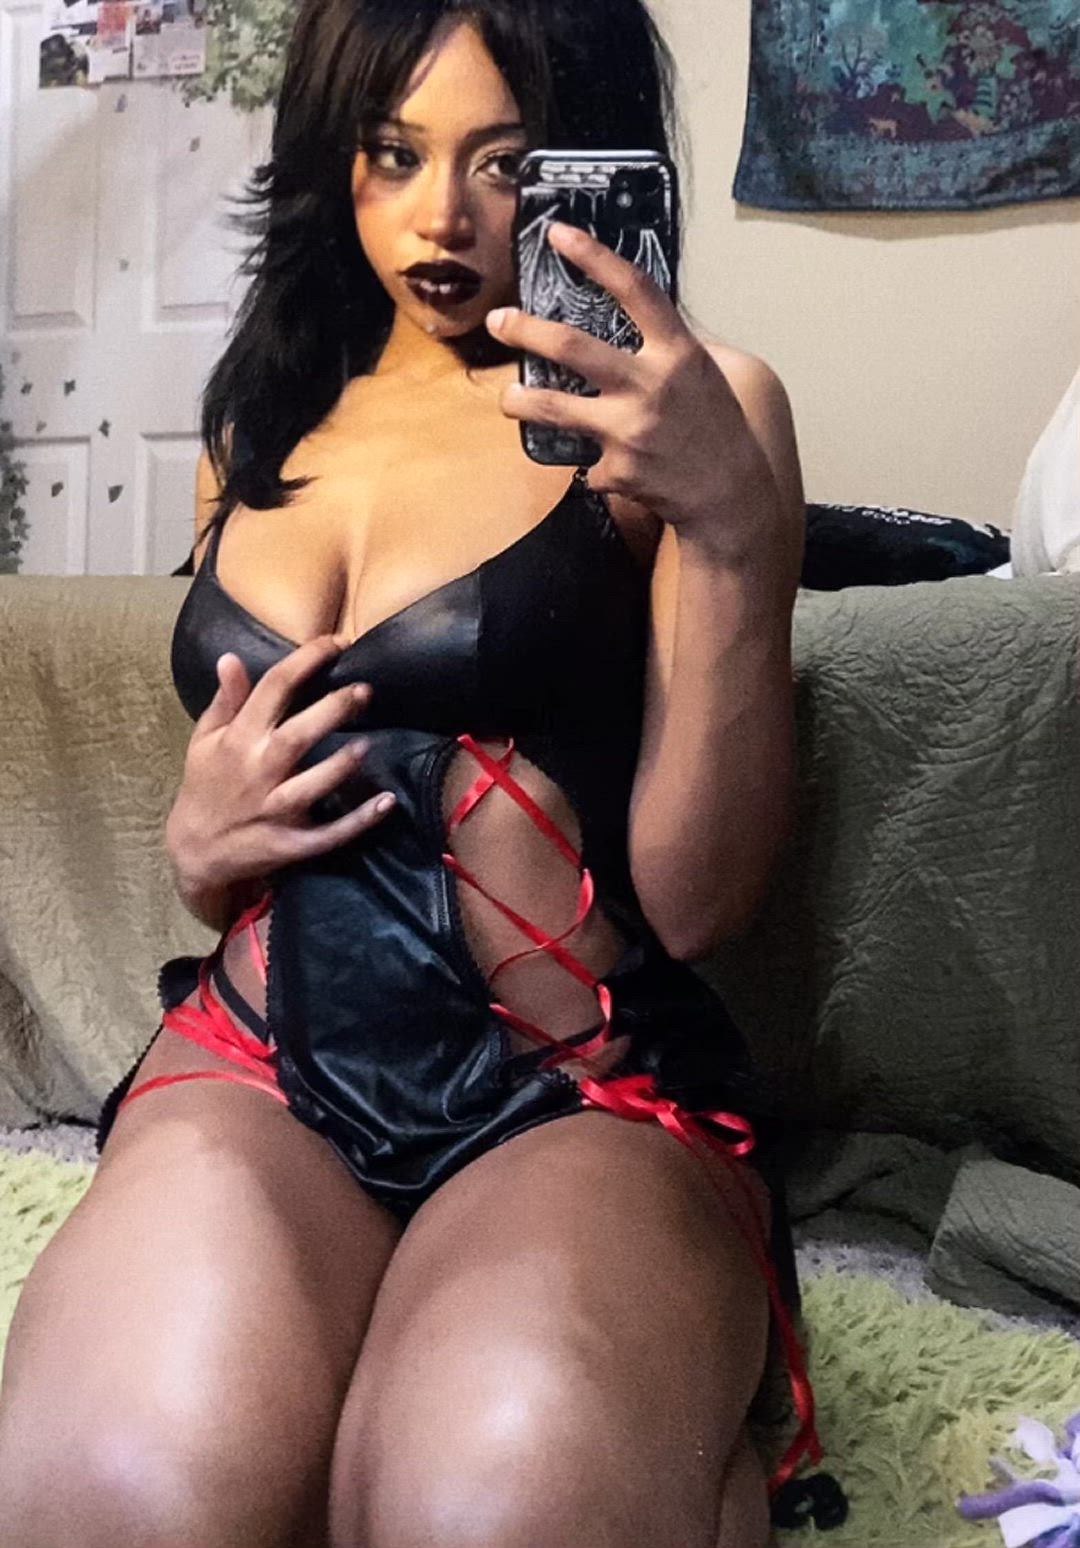 Ass porn video with onlyfans model theprettyoni <strong>@theprettyoni</strong>